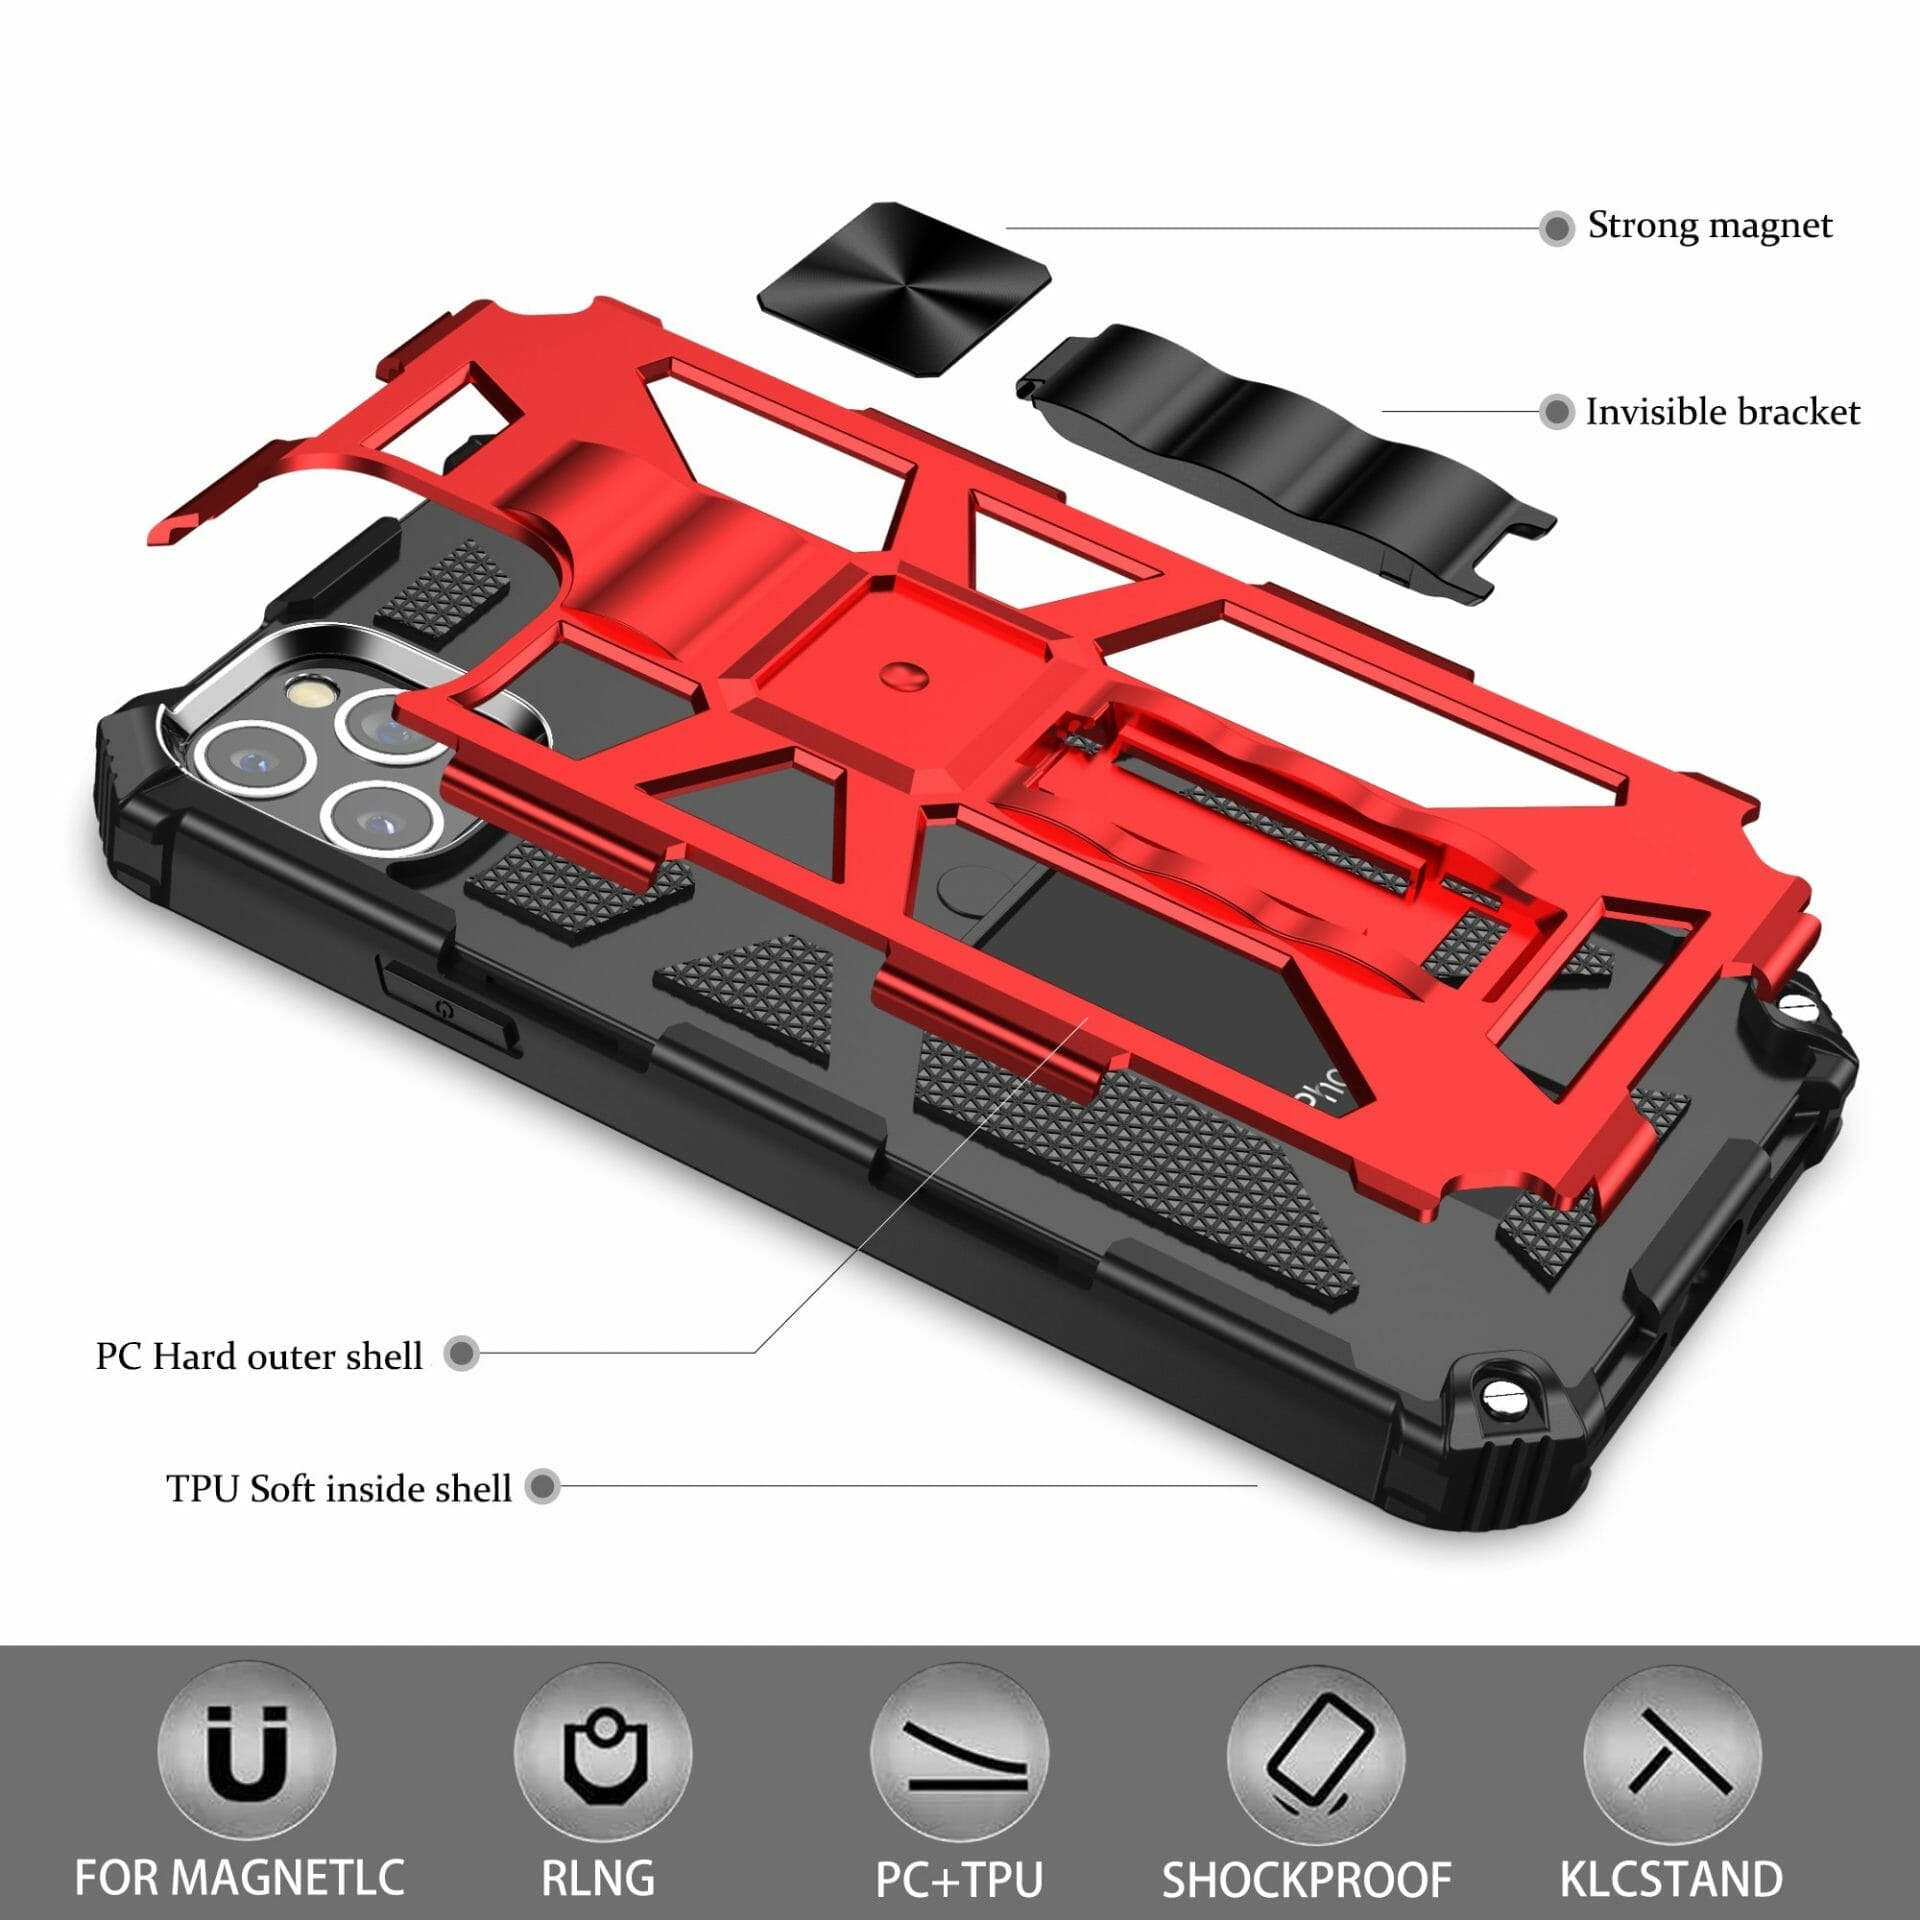 The Armor Shockproof Magnetic Ring Bracket Hybrid Case For iPhone 5